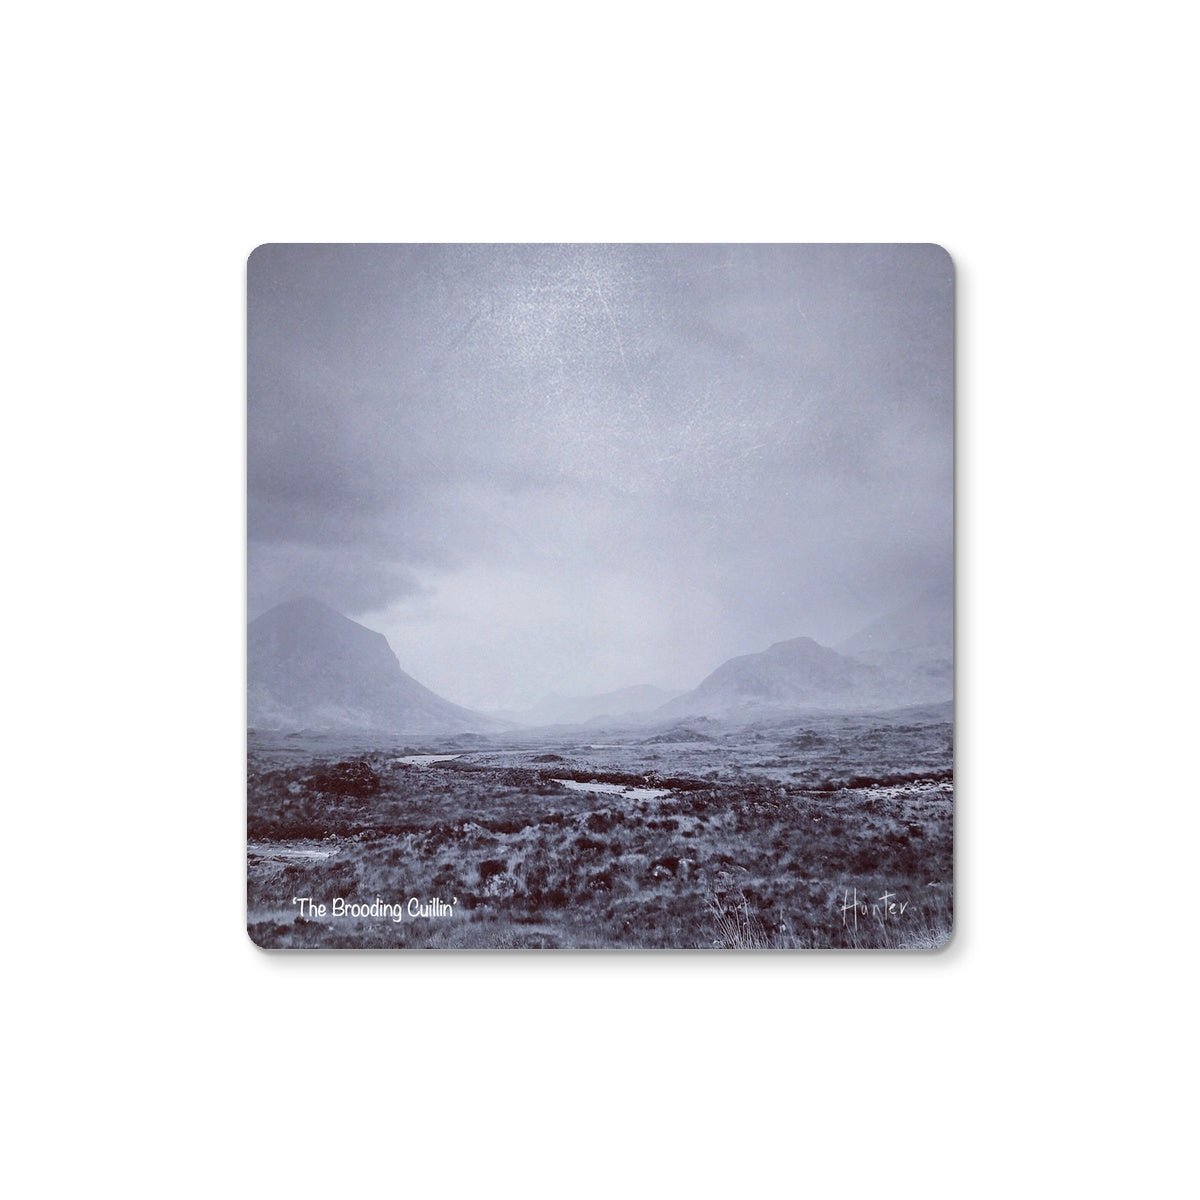 The Brooding Cuillin Skye Art Gifts Coaster-Coasters-Skye Art Gallery-Single Coaster-Paintings, Prints, Homeware, Art Gifts From Scotland By Scottish Artist Kevin Hunter